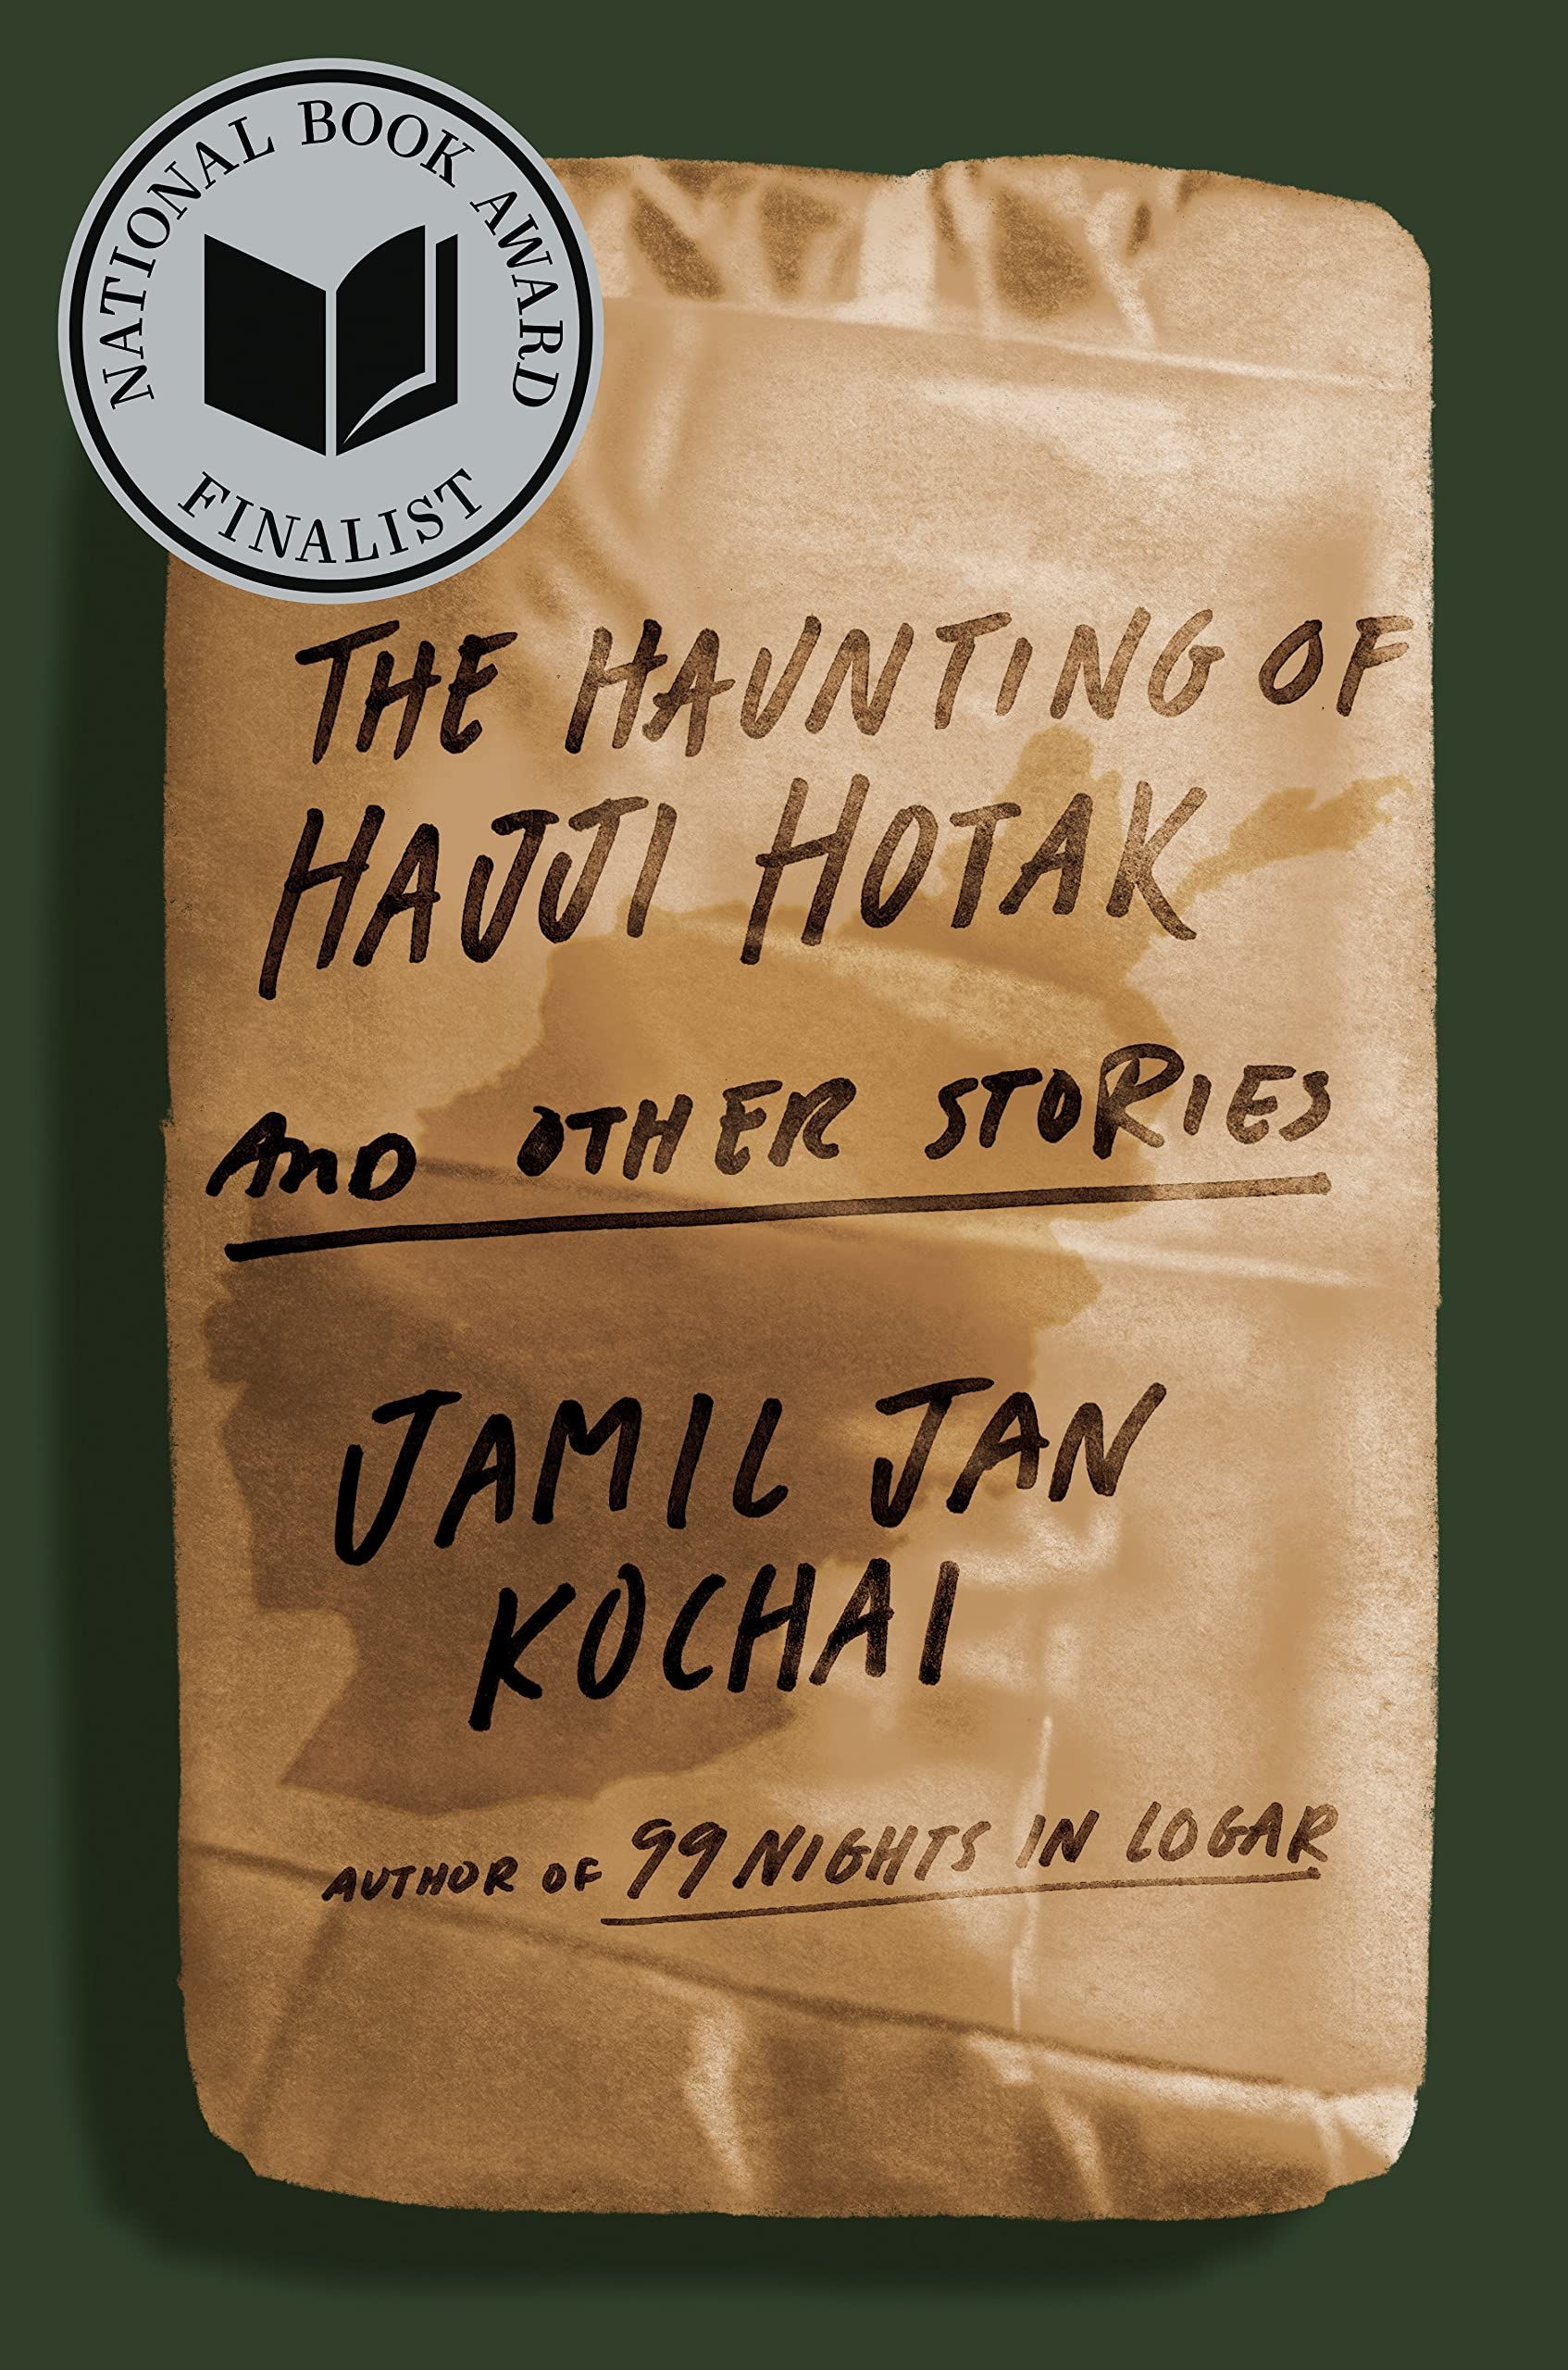 War Is a Structure: On Jamil Jan Kochai’s “The Haunting of Hajji Hotak and Other Stories”